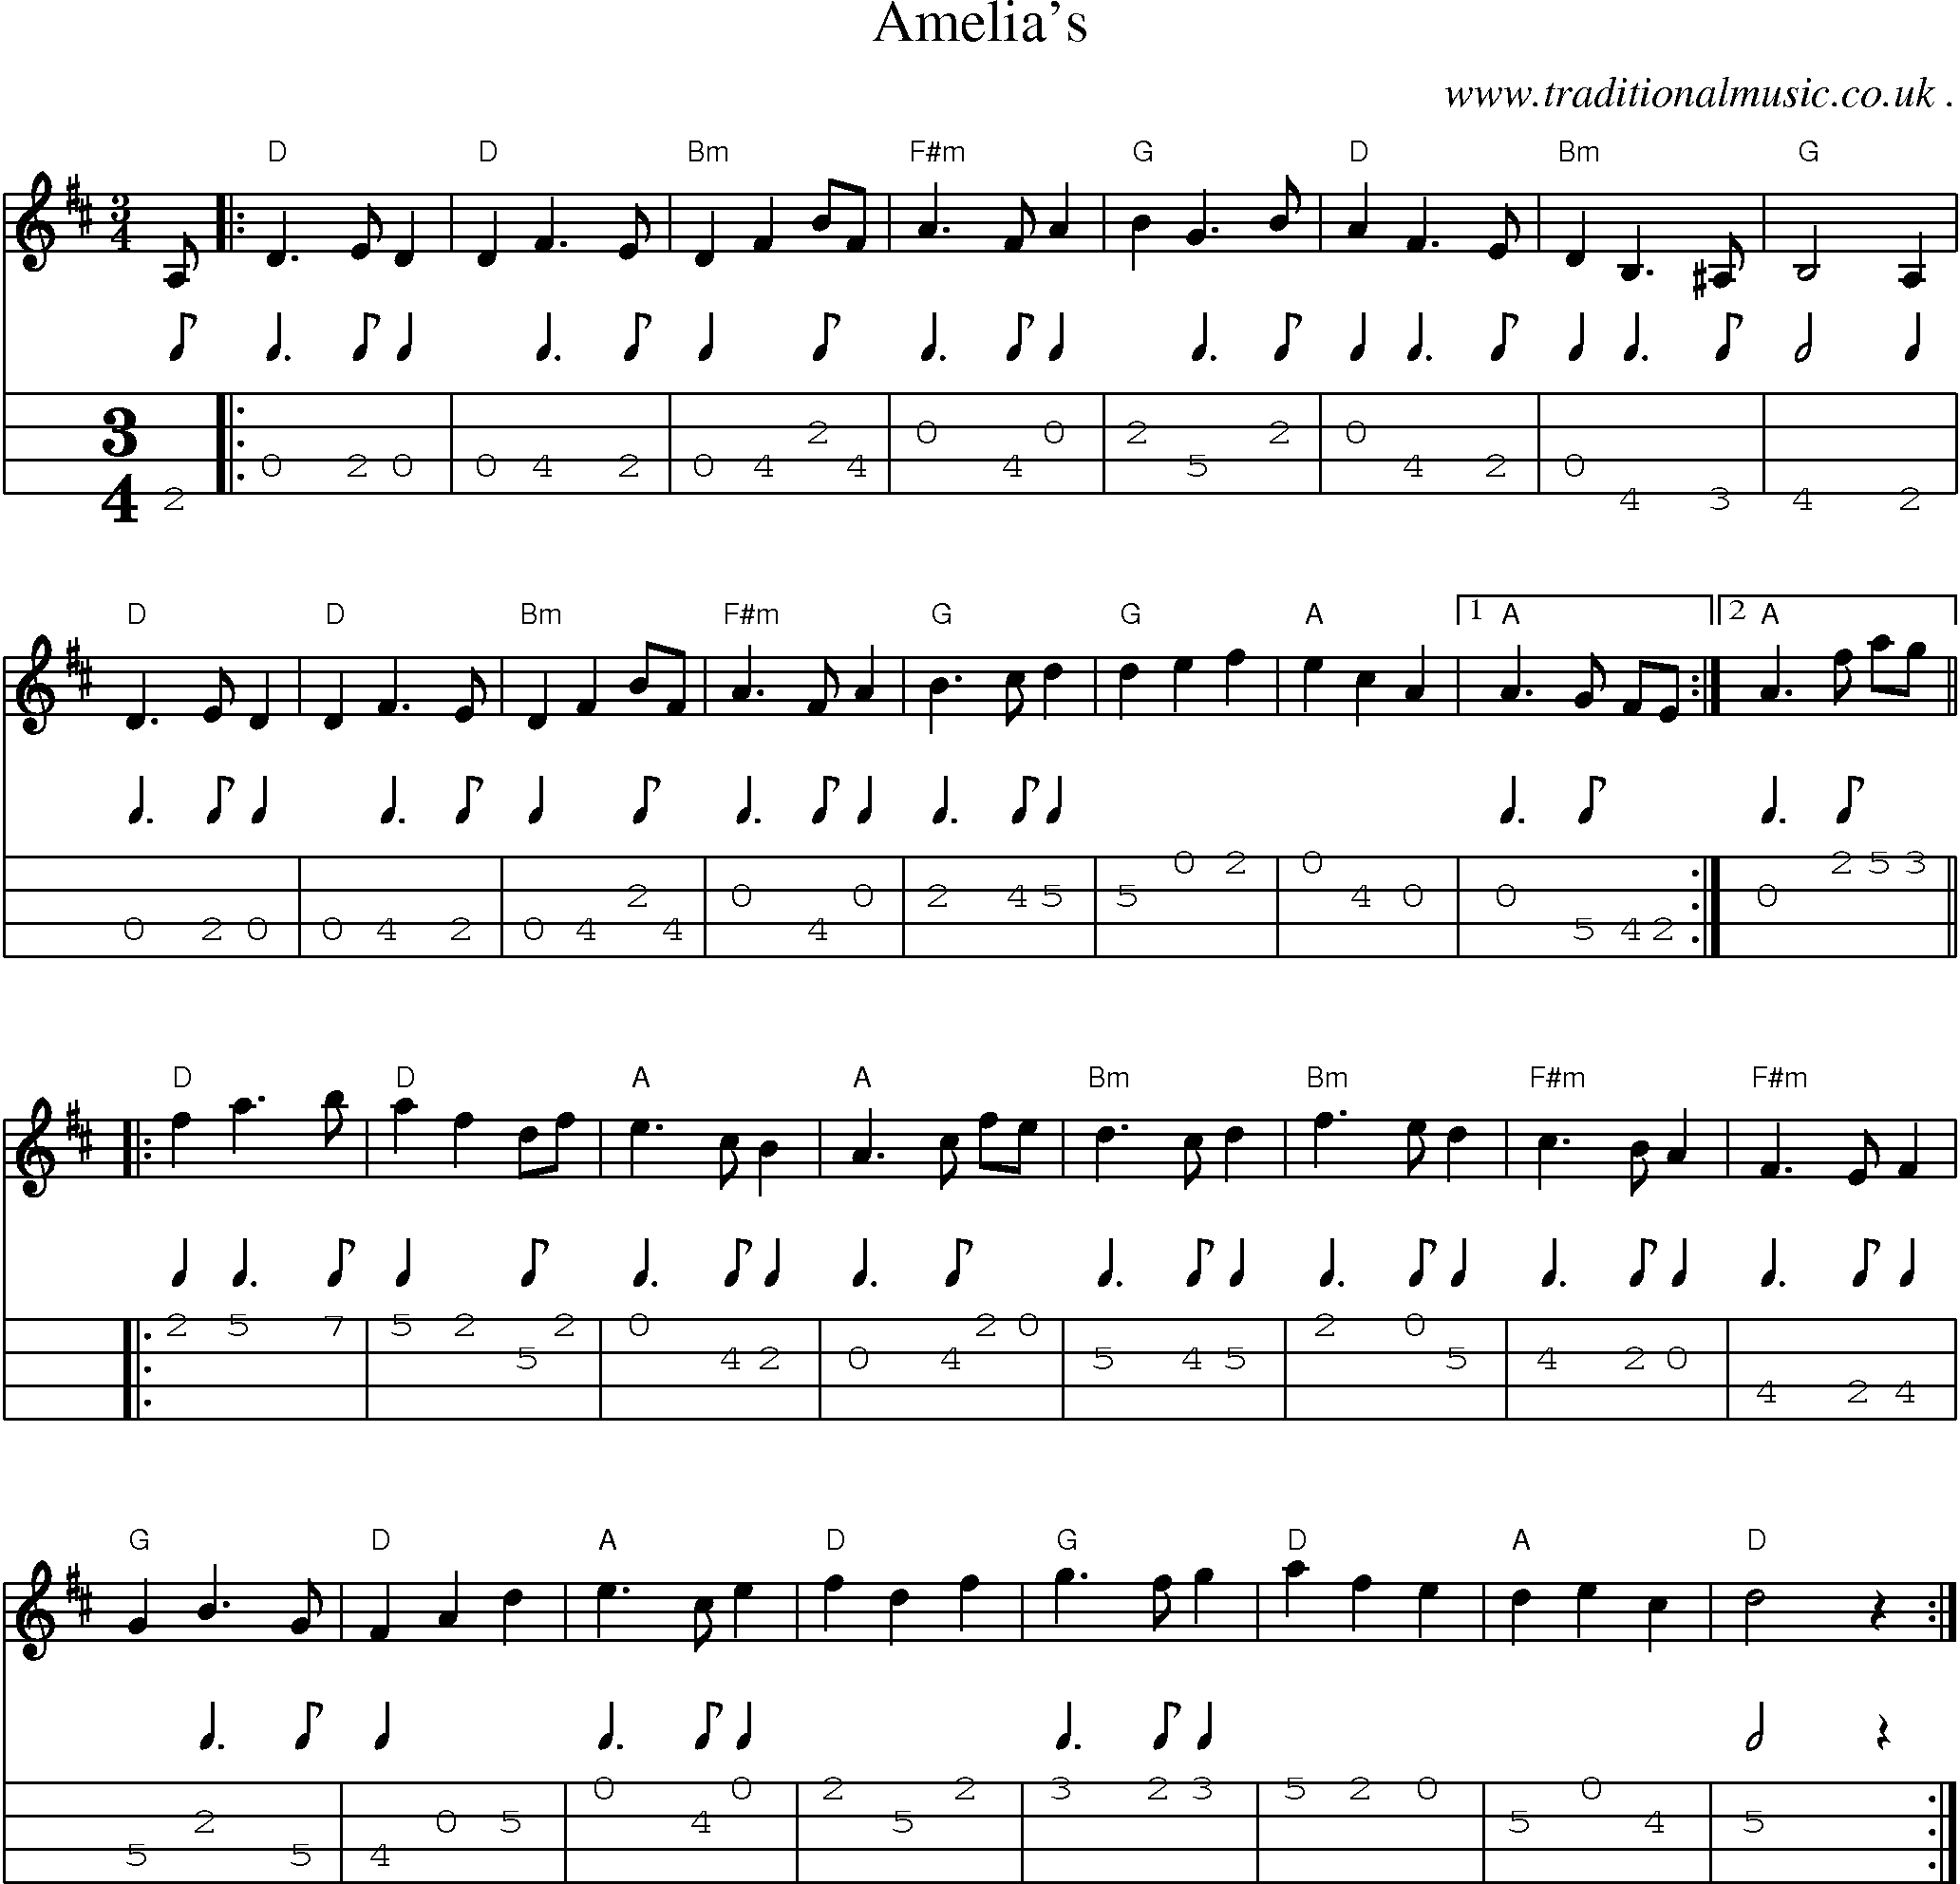 Music Score and Mandolin Tabs for Amelias